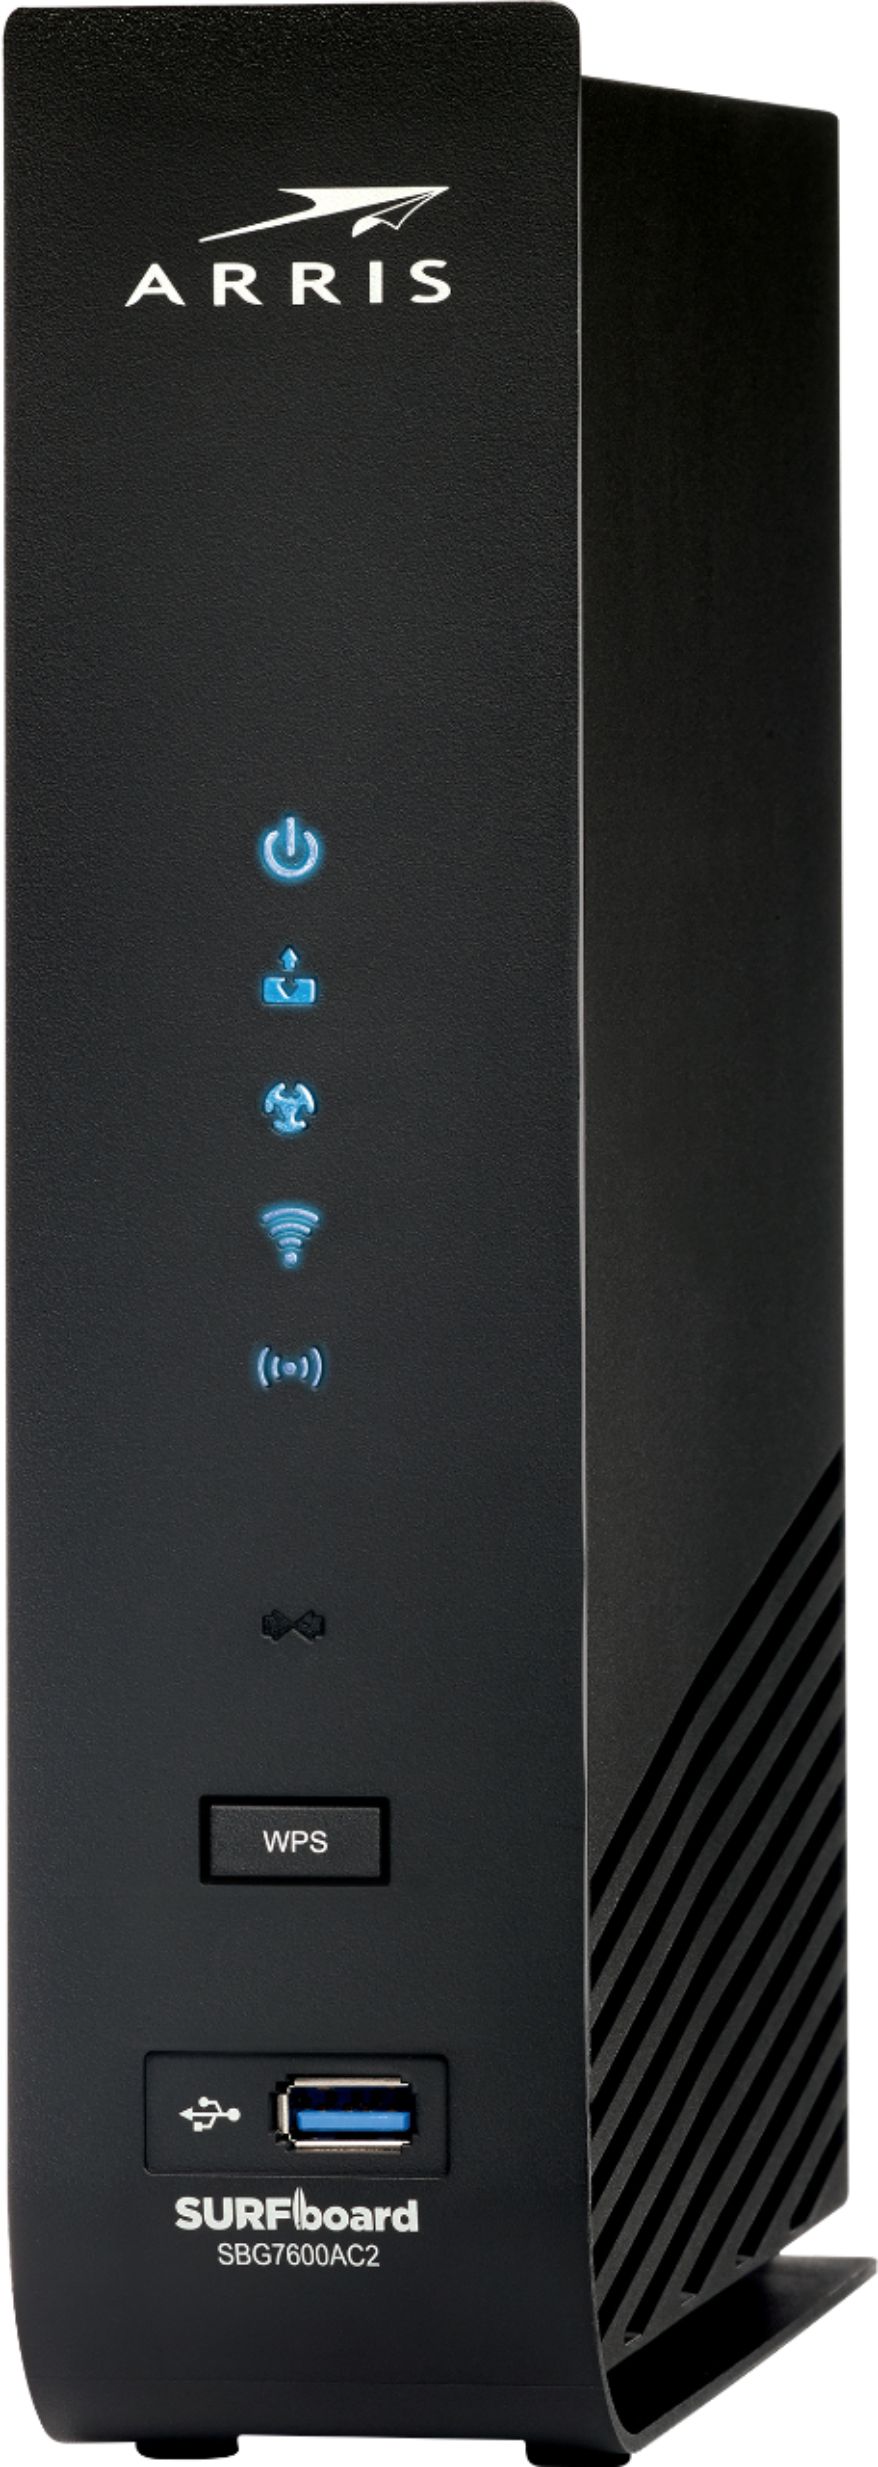 Angle View: NETGEAR - Nighthawk AX2700 Router with 32 x 8 DOCSIS 3.1 Cable Modem - Black